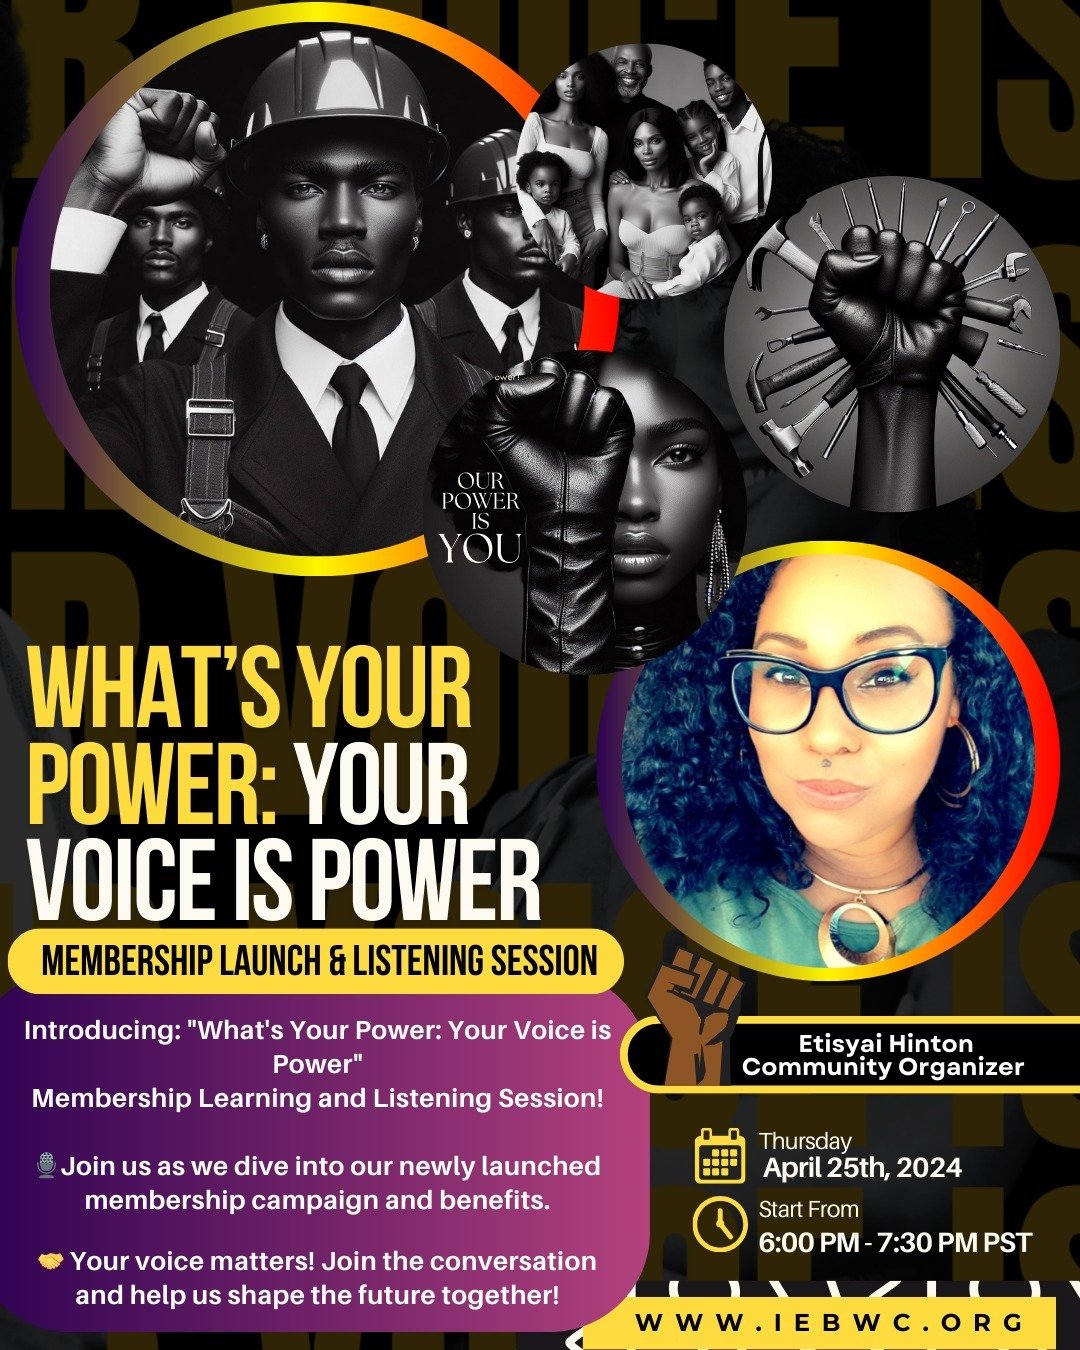 🌟 Join Us Tonight for a Special Listening Session! 🌟

Calling all advocates for change and empowerment! Tonight, from 6:00 PM to 7:30 PM (PST), we're hosting a dynamic listening session you won't want to miss.

🎙️ Theme: &quot;What's Your Power: Y